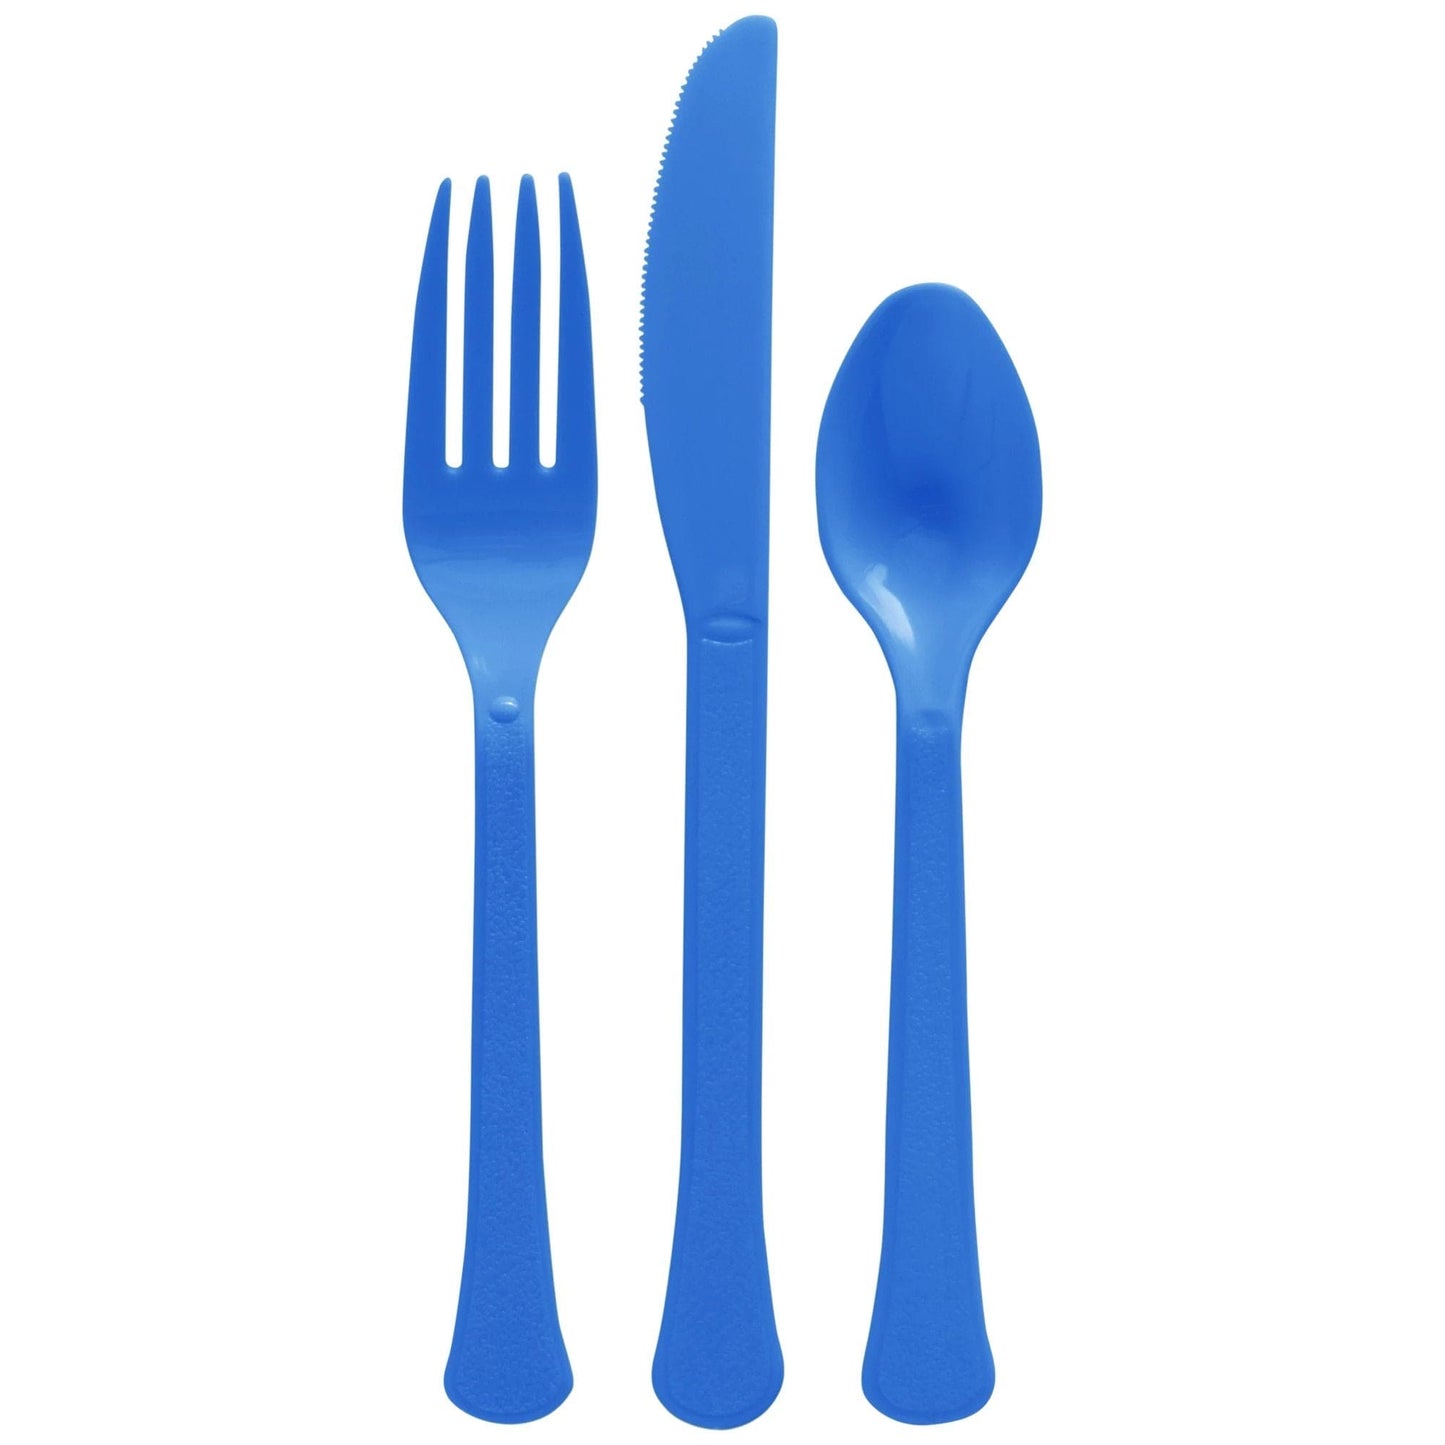 Heavy Weight Cutlery Asst., High Ct. - Bright Royal Blue 200 Ct